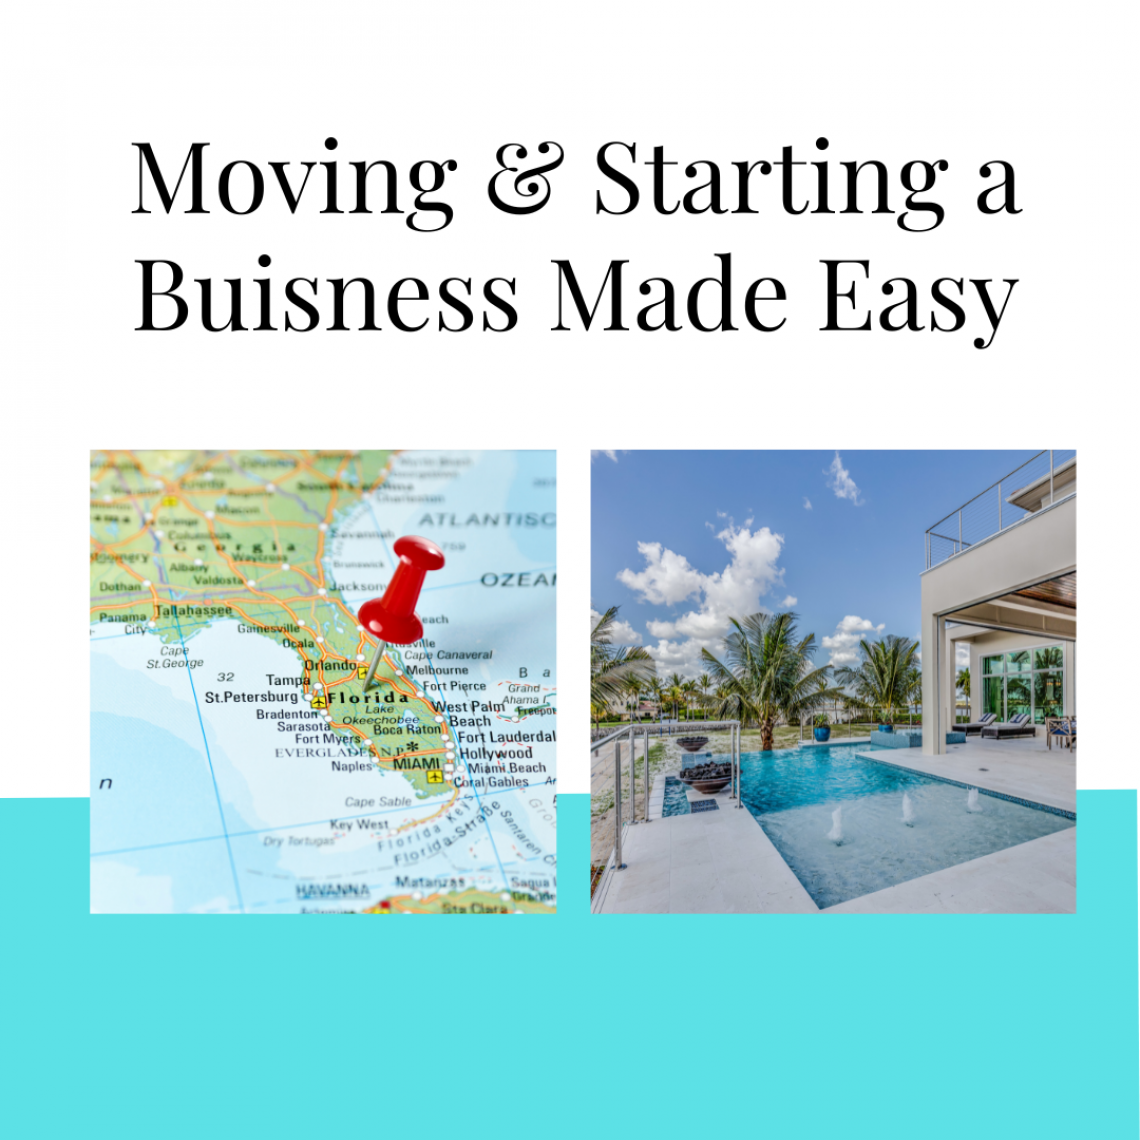 Moving and Starting a Business